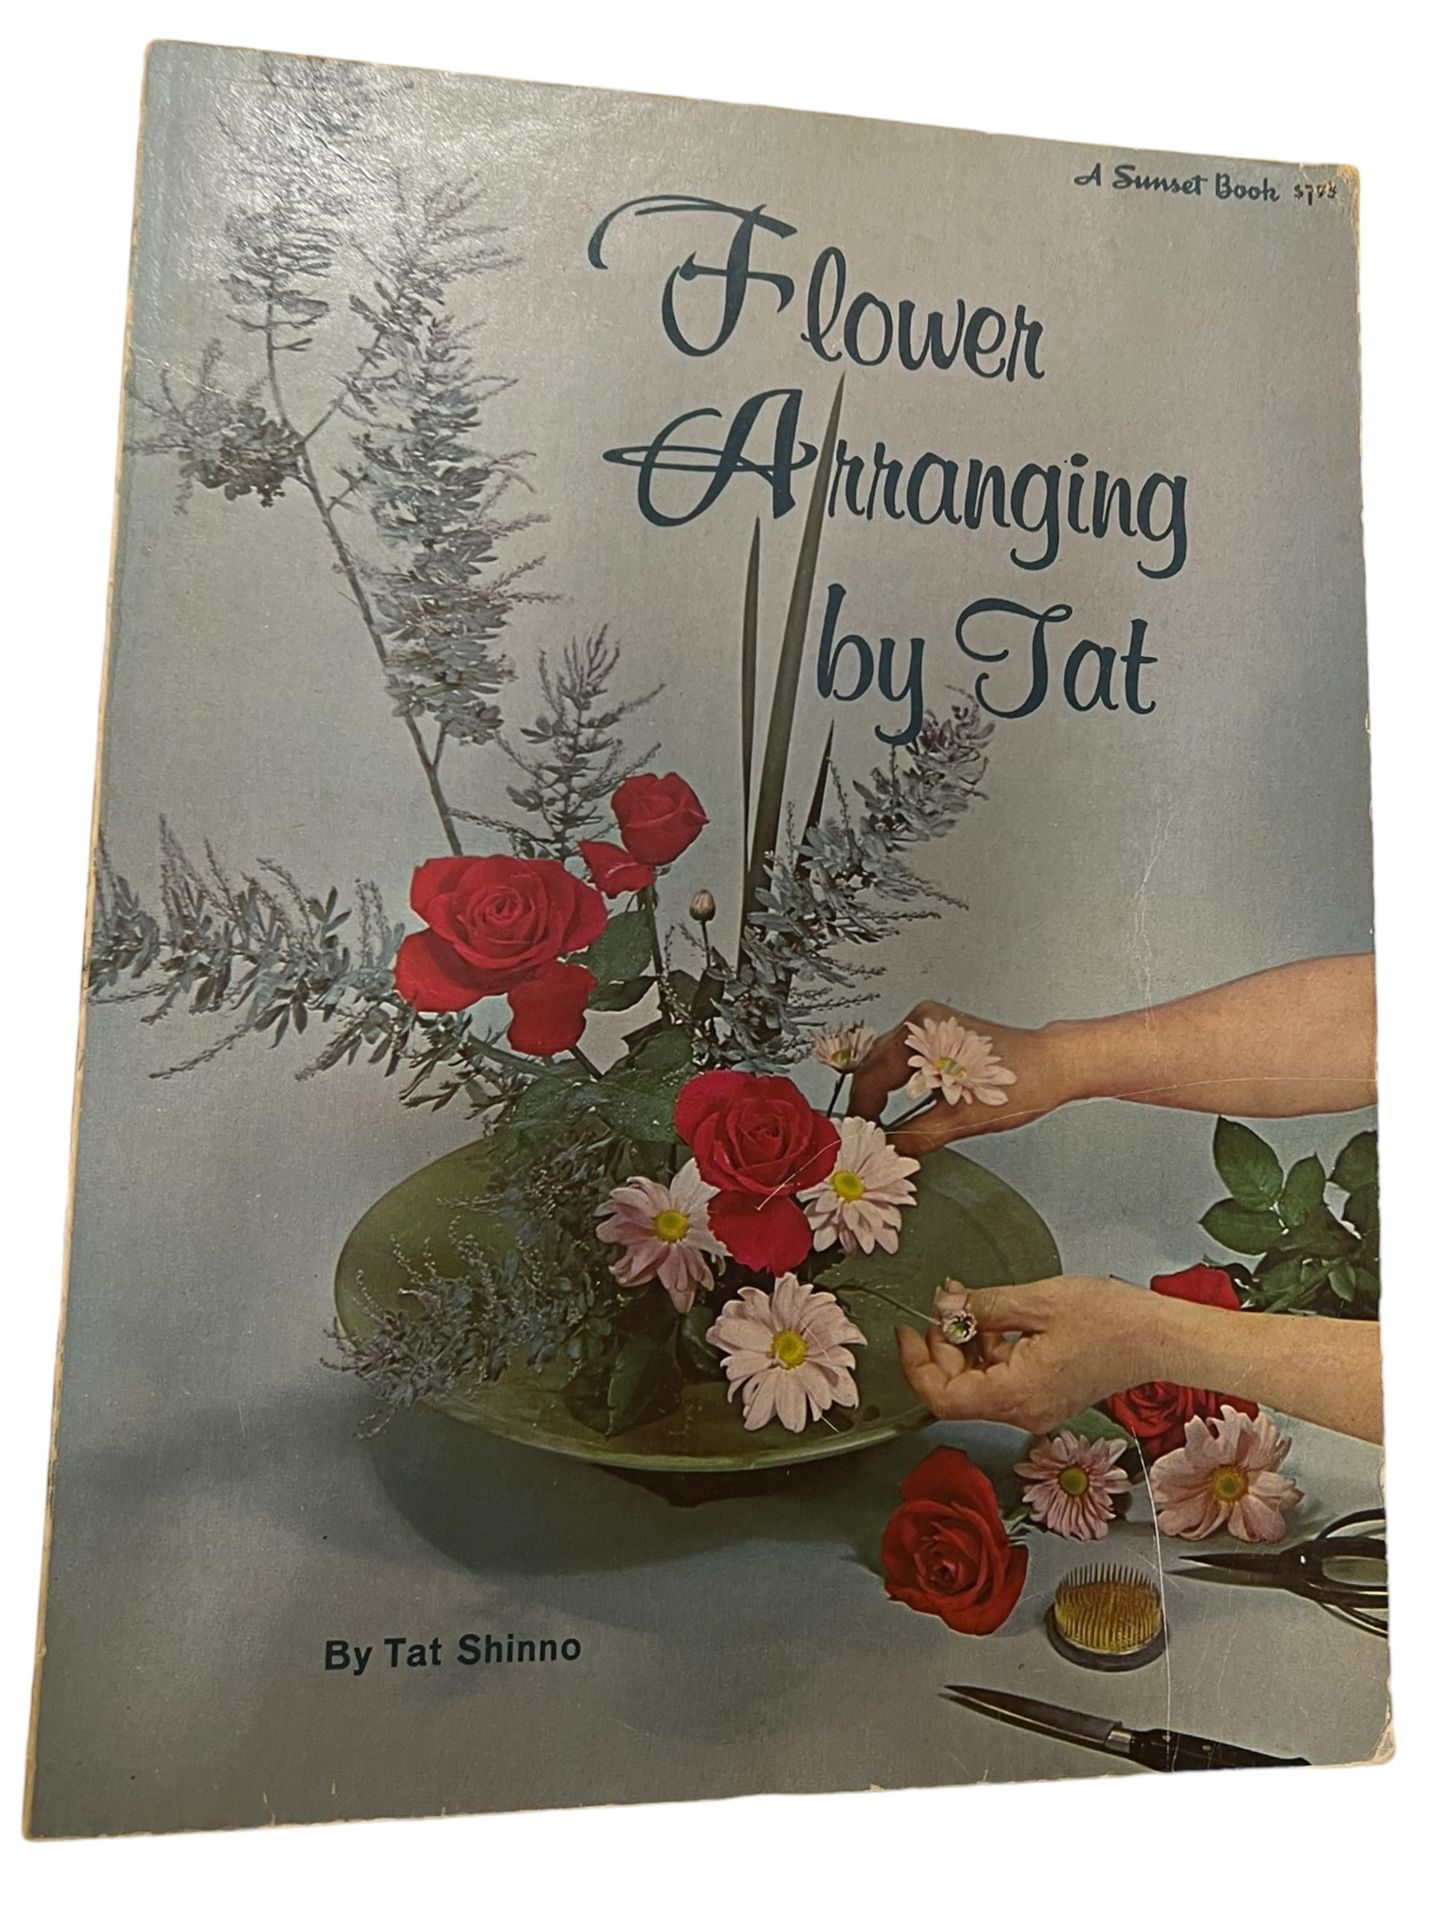 Flower Arranging Adult Floral Picture Sunset Book Paperback By Tat Shinno  This stunning paperback book by Tat Shinno is the perfect addition to any f